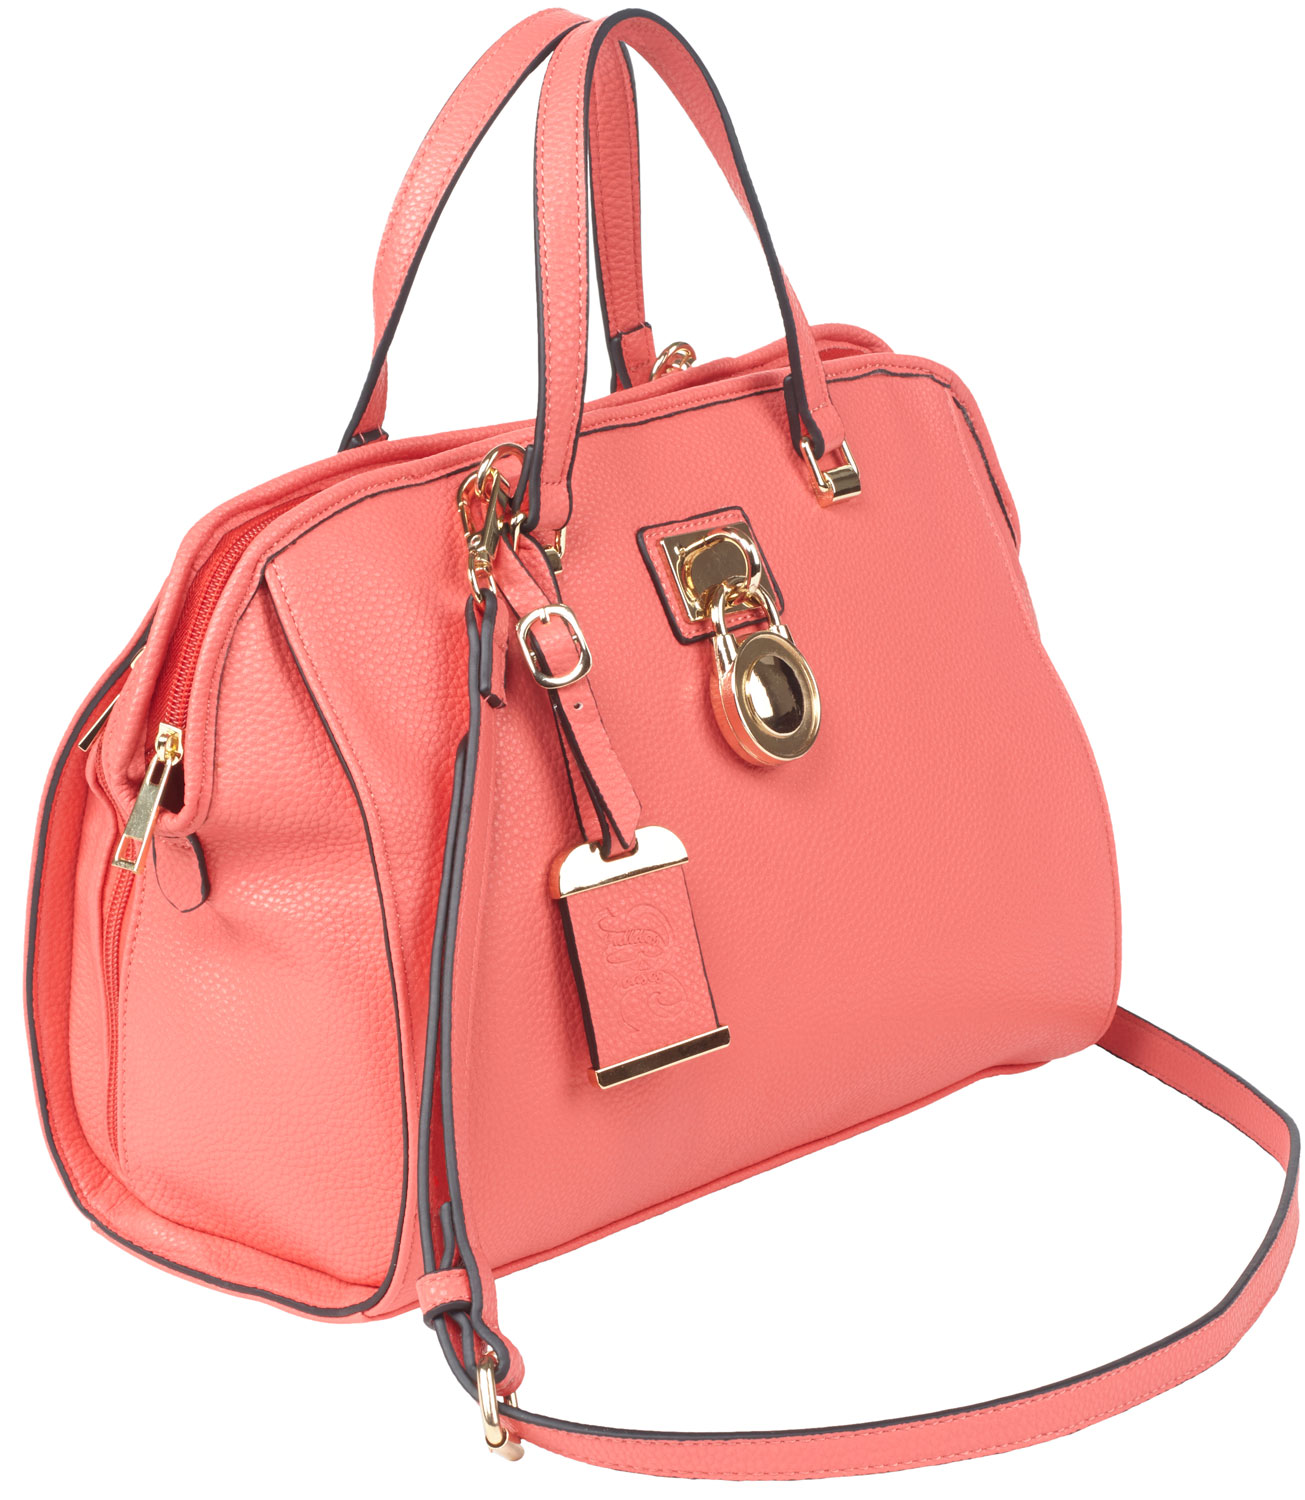 BULLDOG CONCEALED CARRY PURSE SATCHEL CORAL